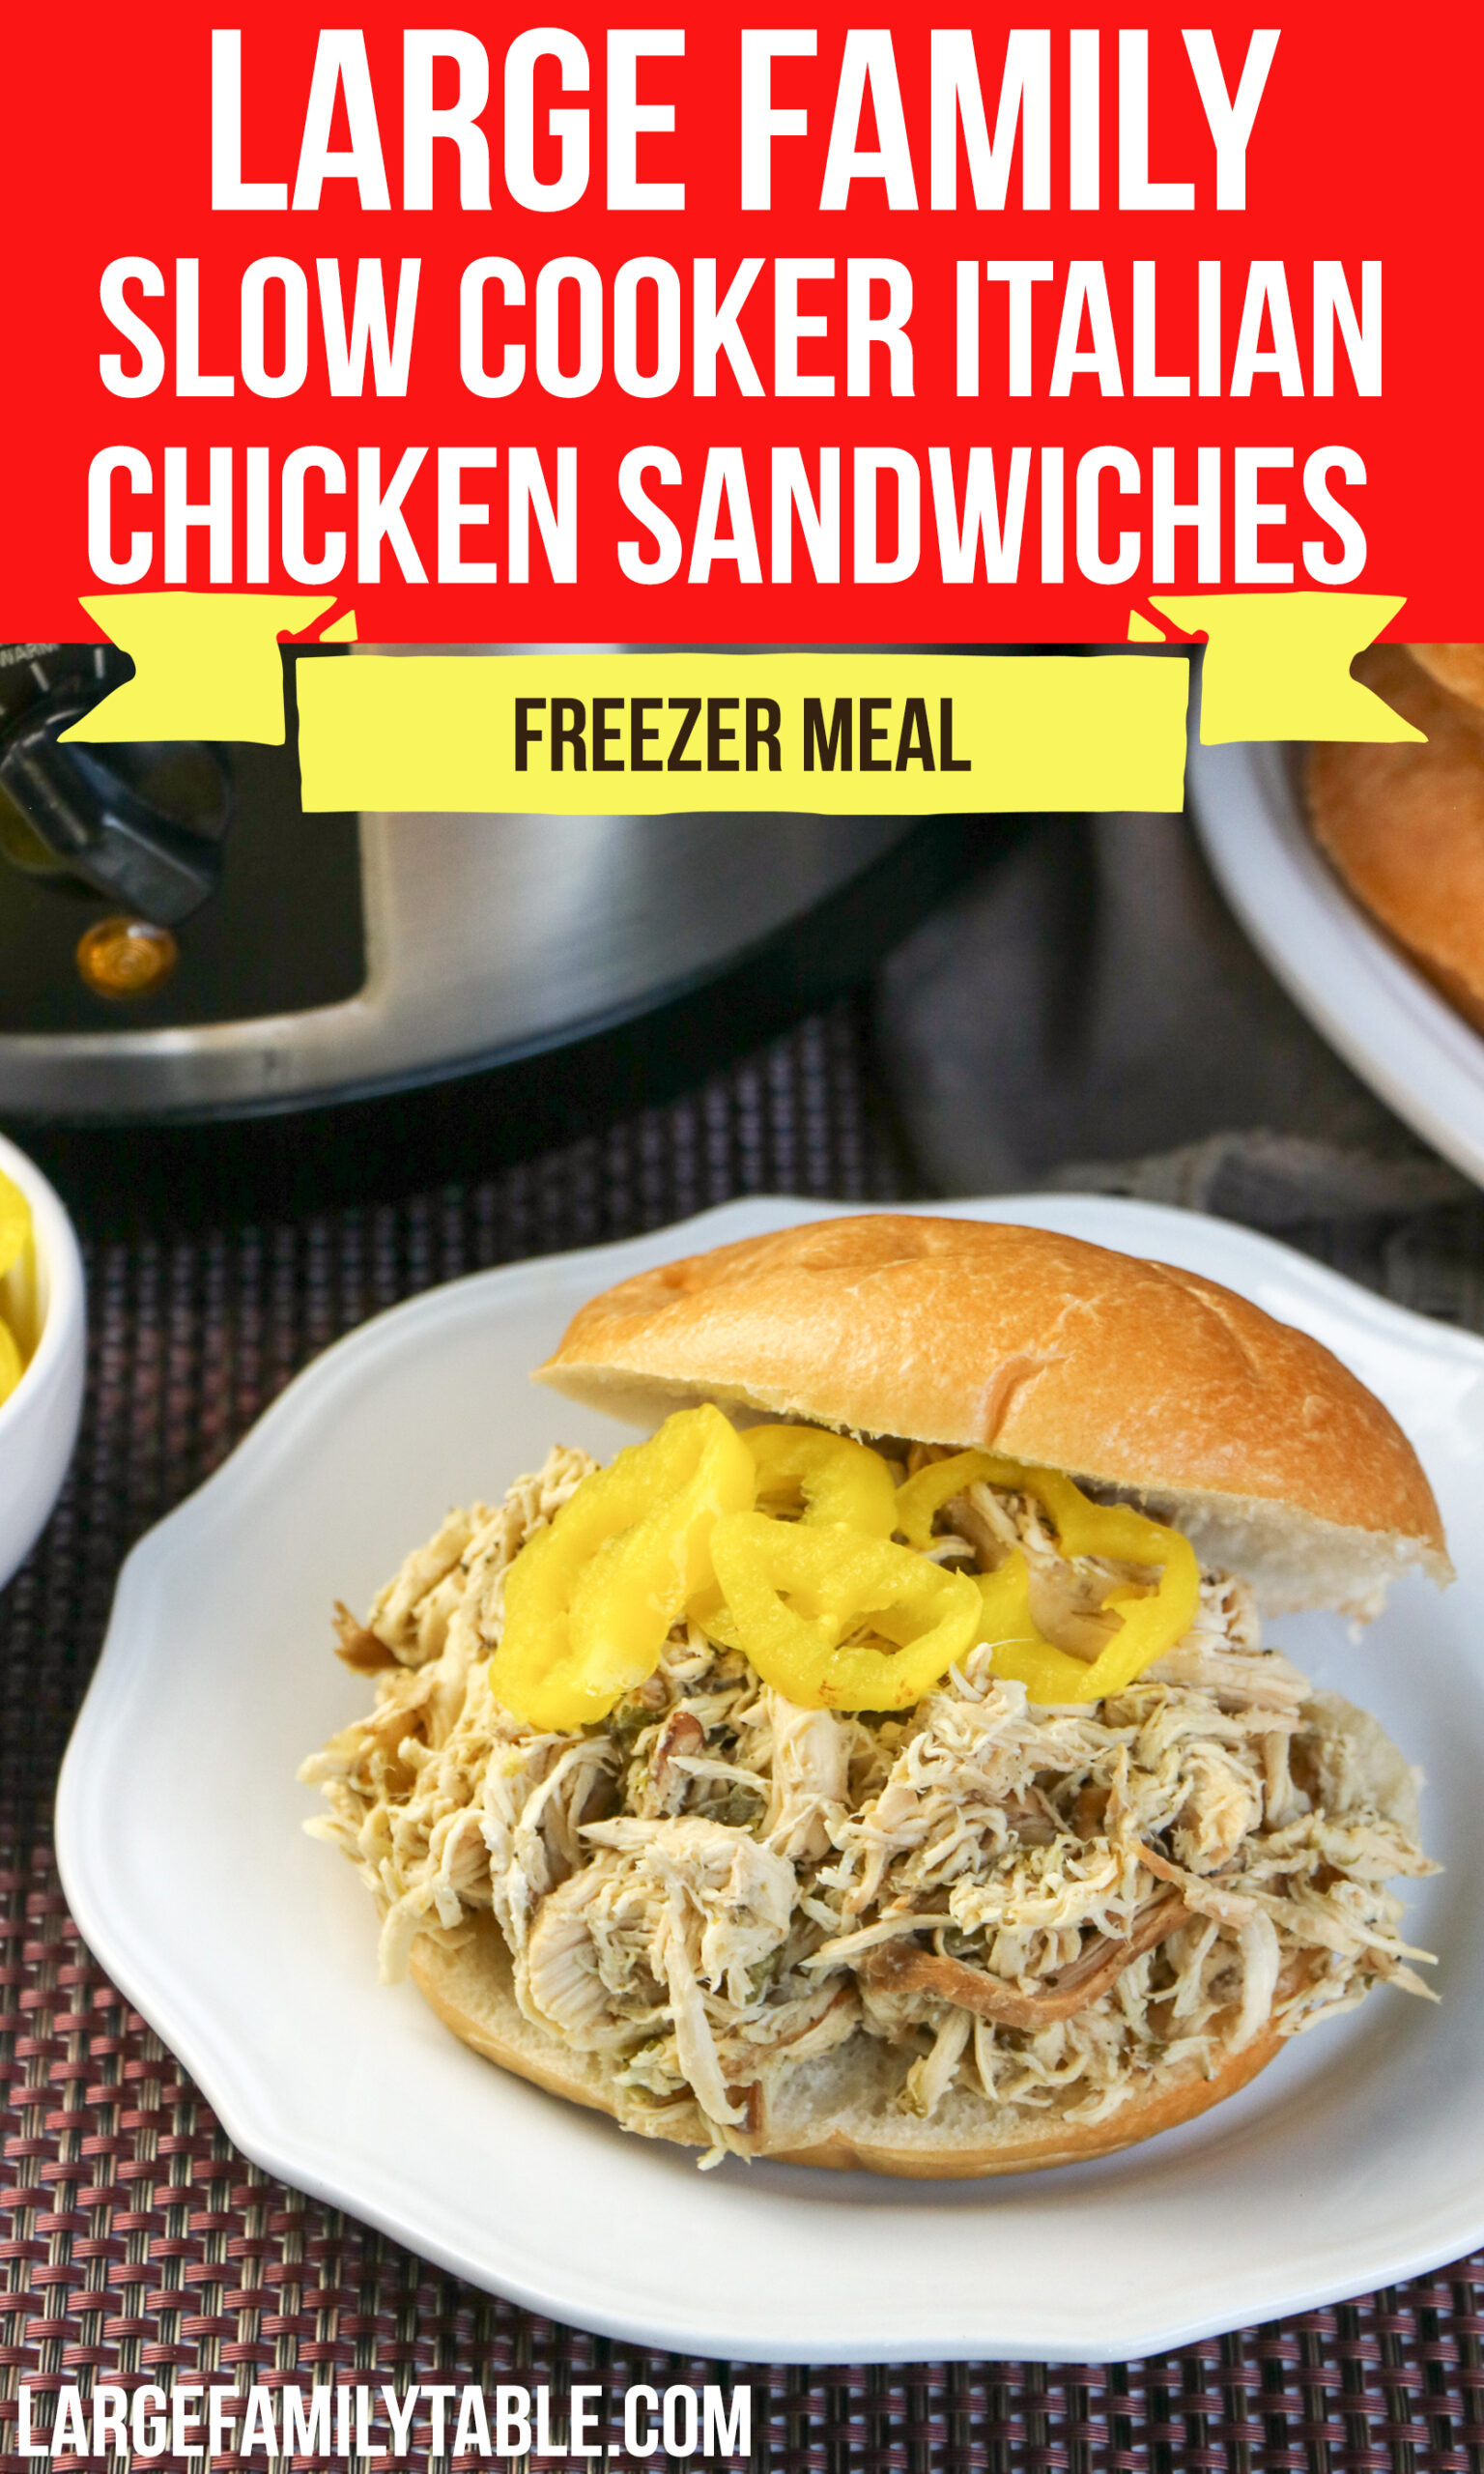 Large-Family-Slow-Cooker-Italian-Chicken-Sandwiches - Large Family Table